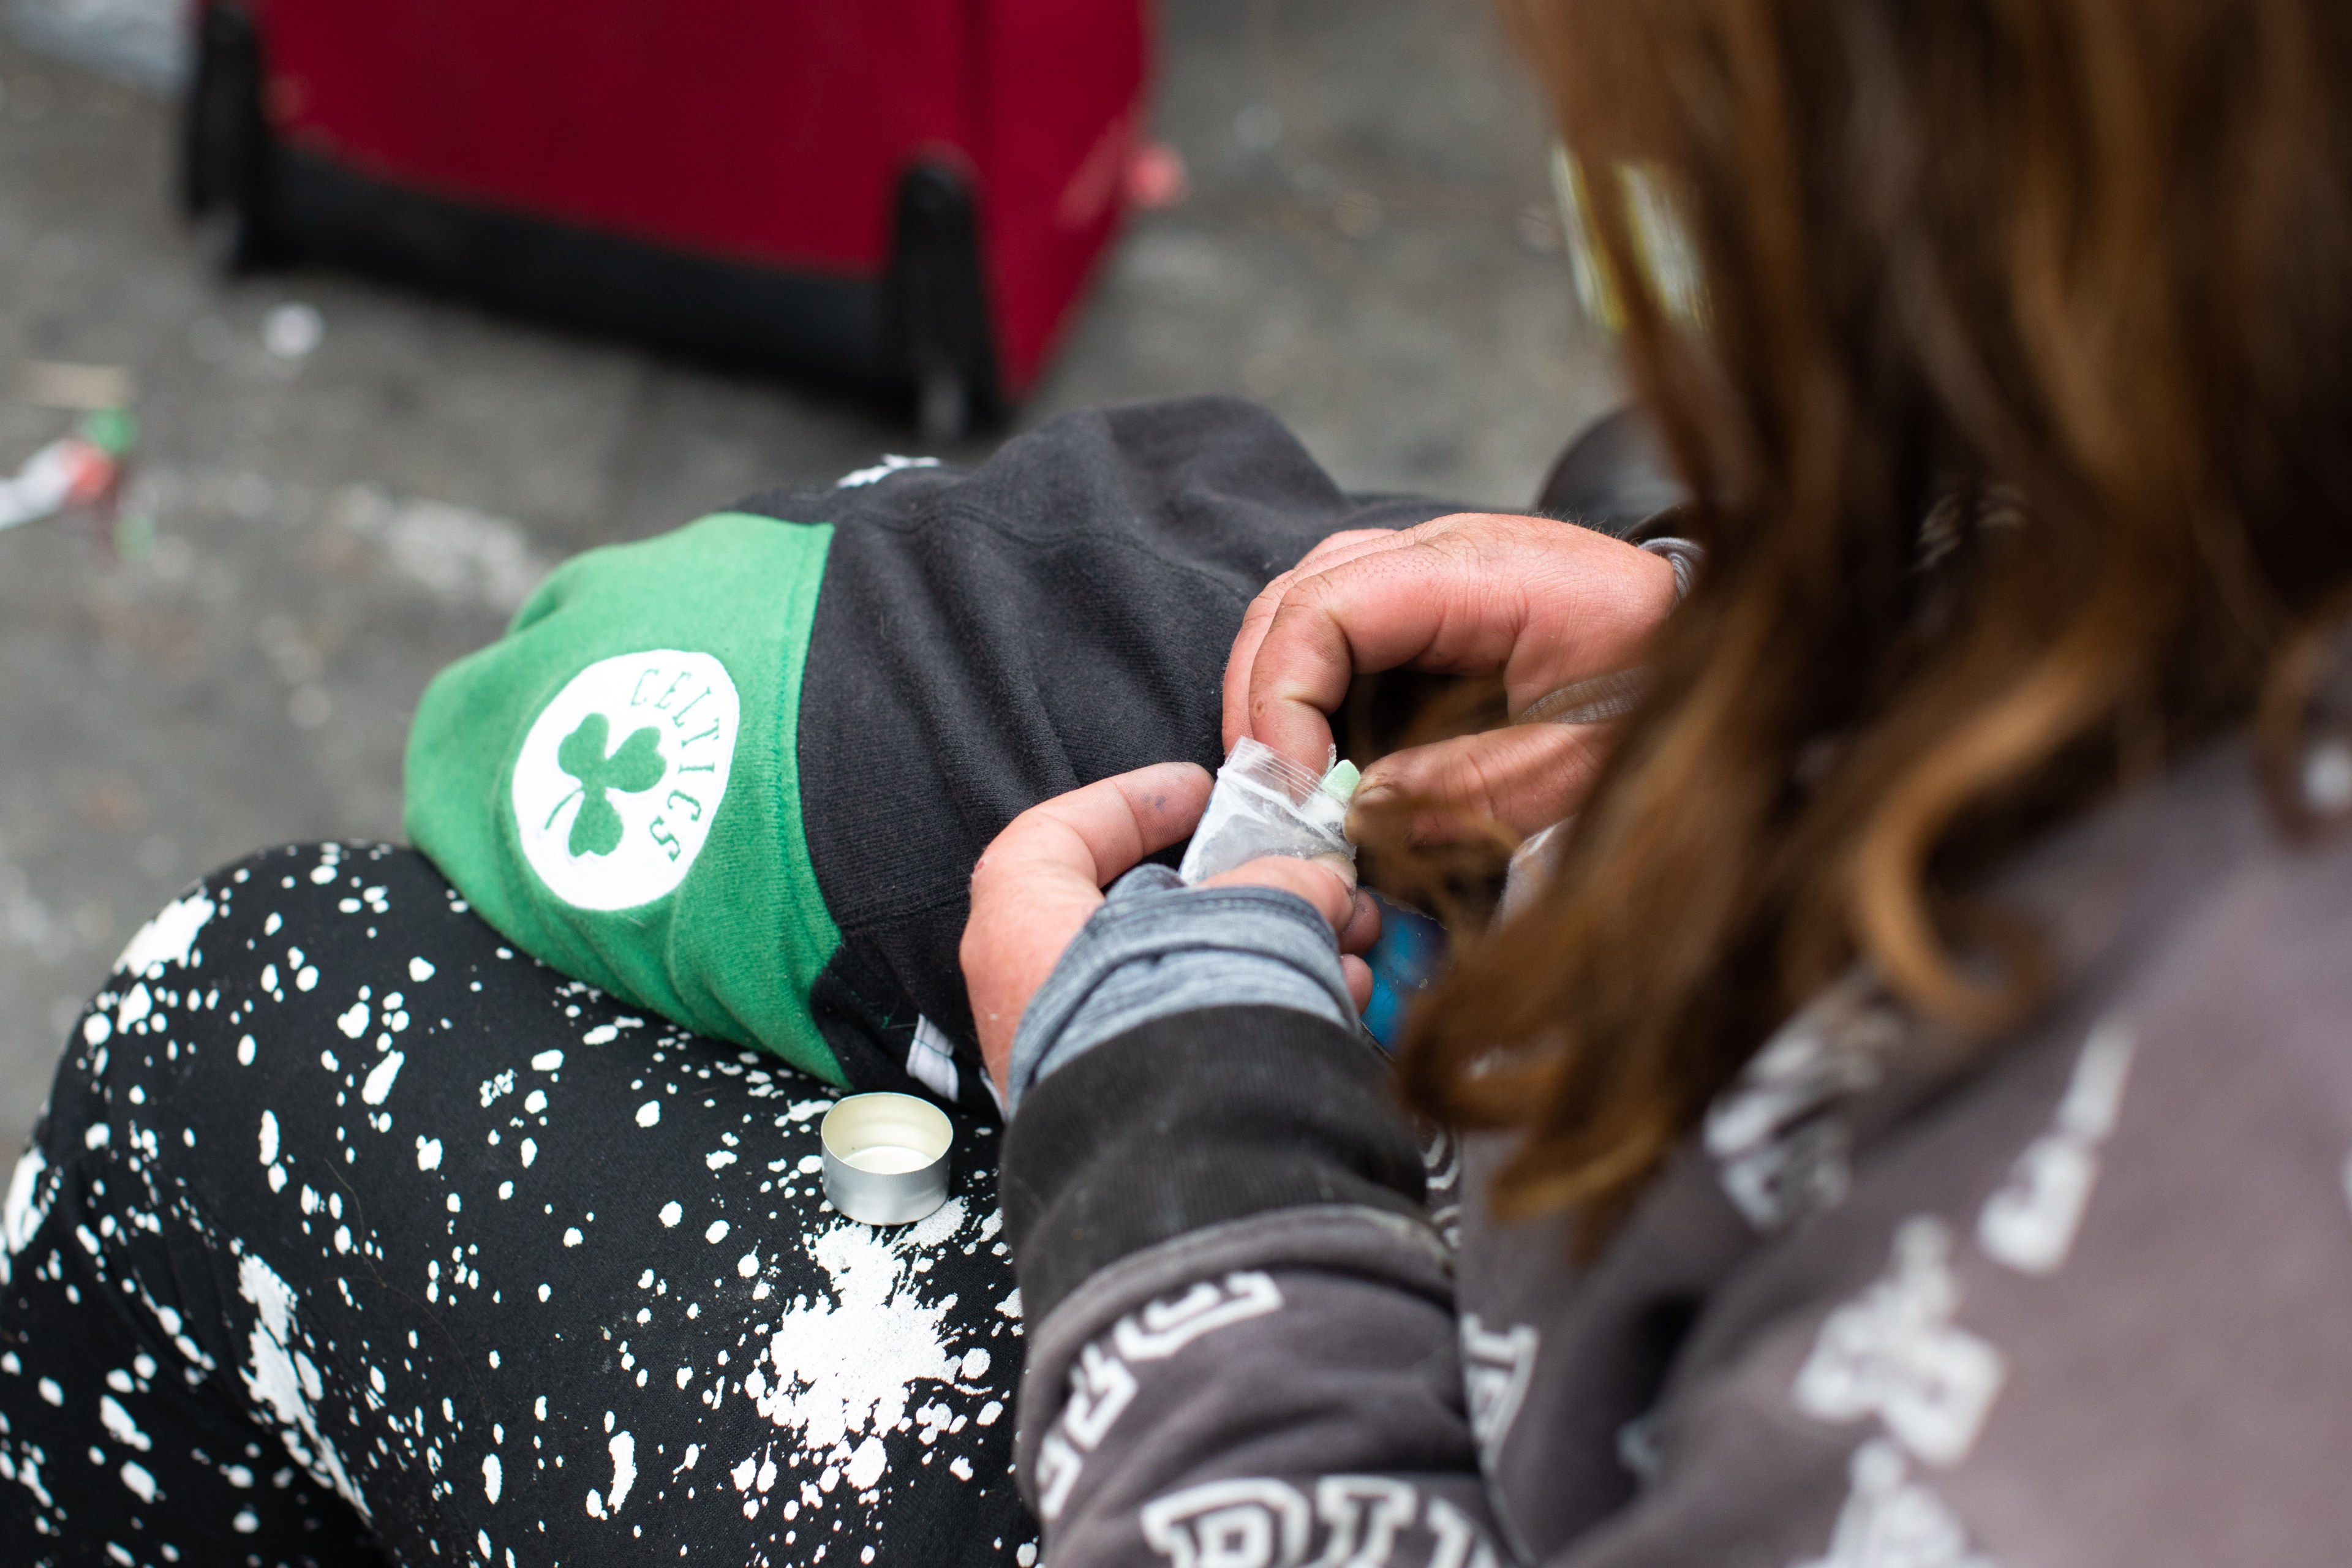 A woman removes drugs from a baggie on the street.